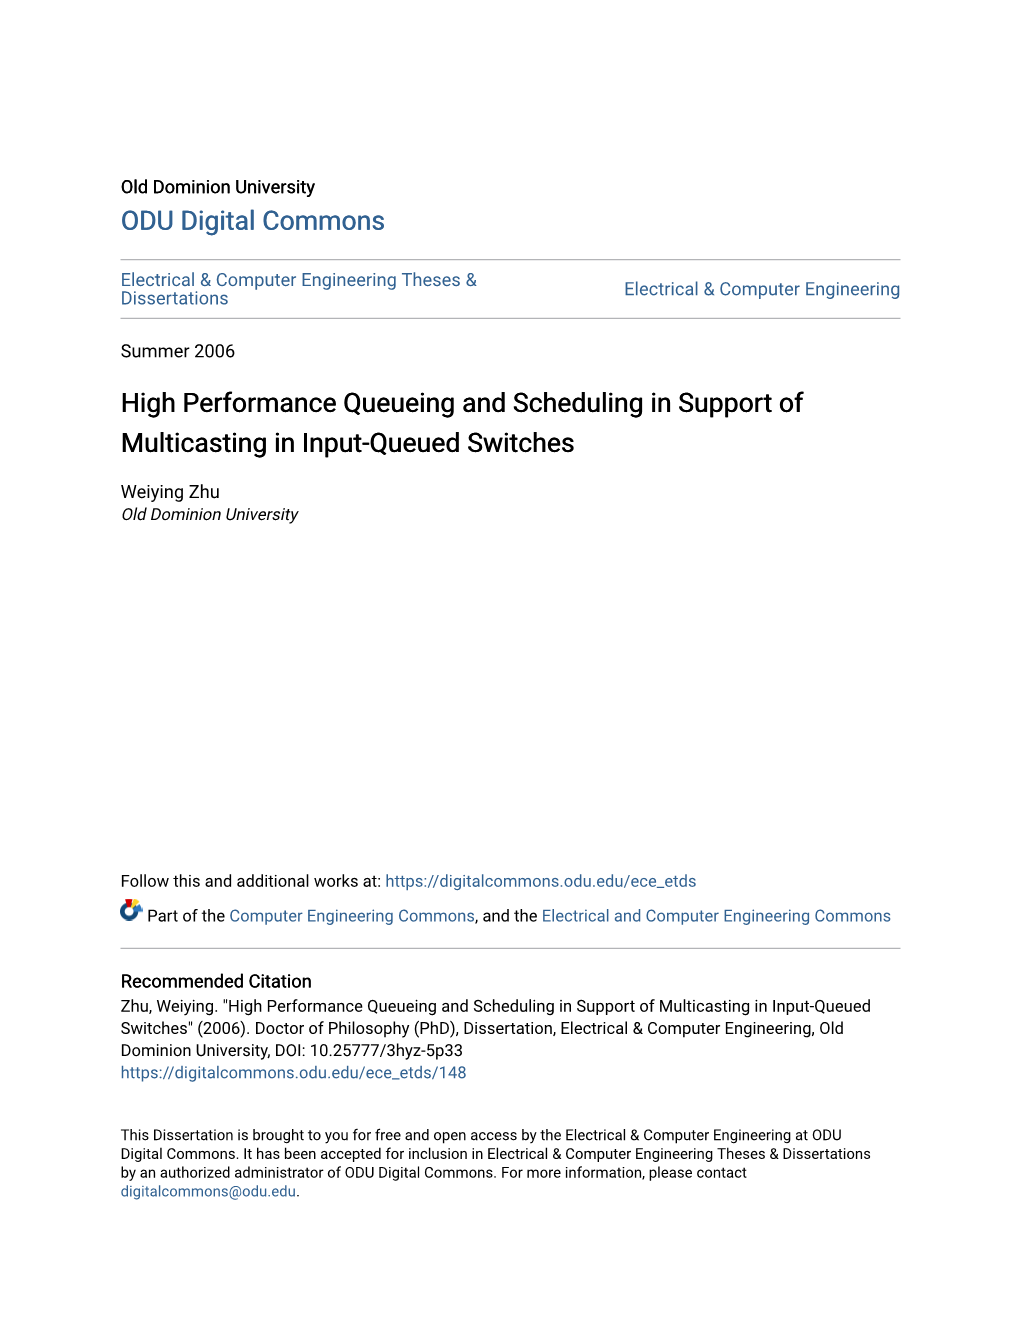 High Performance Queueing and Scheduling in Support of Multicasting in Input-Queued Switches